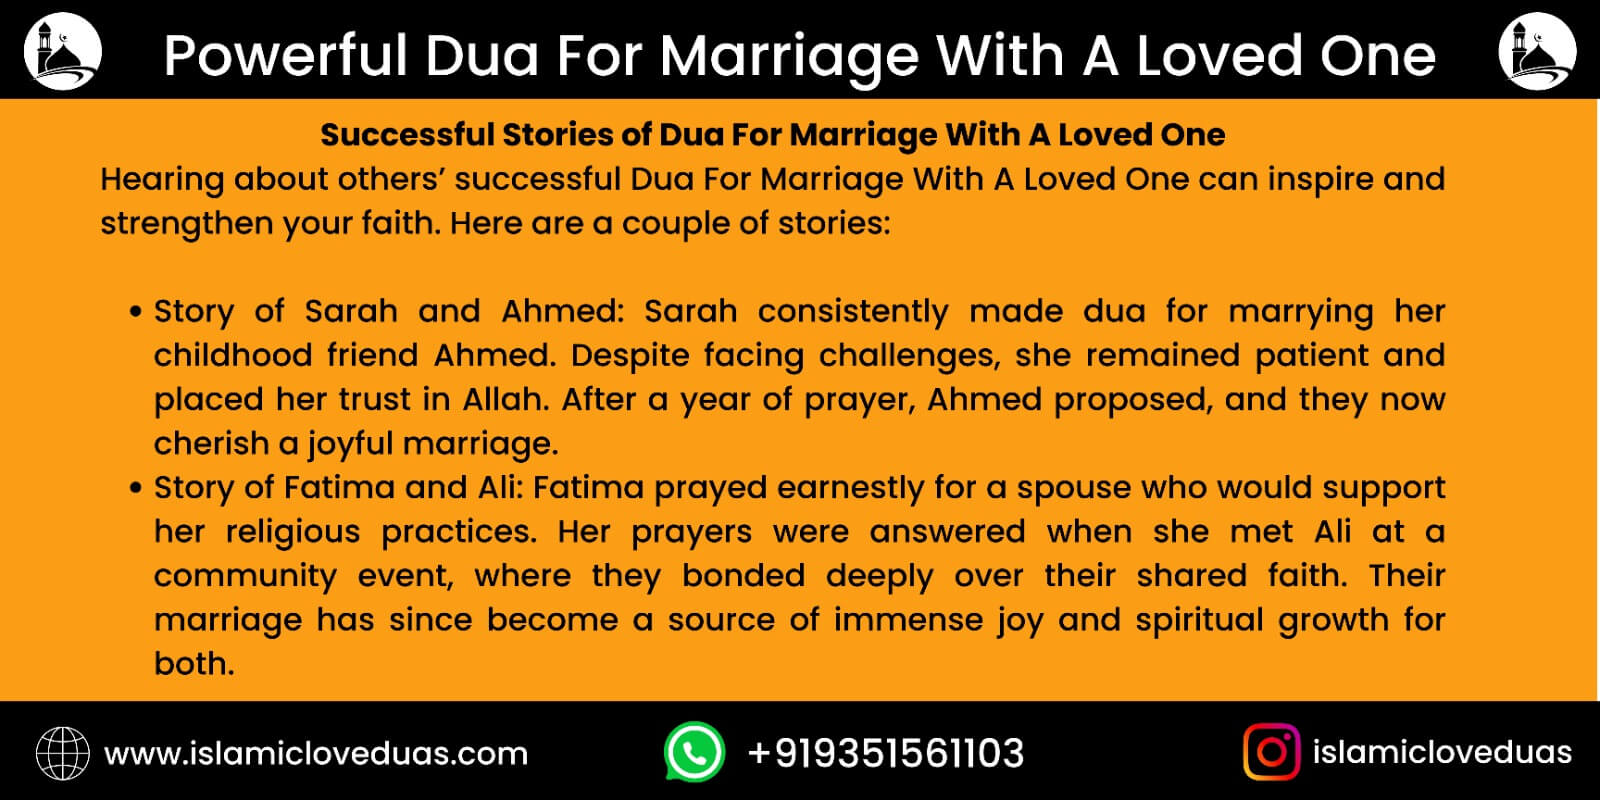 Dua for marriage with a loved one